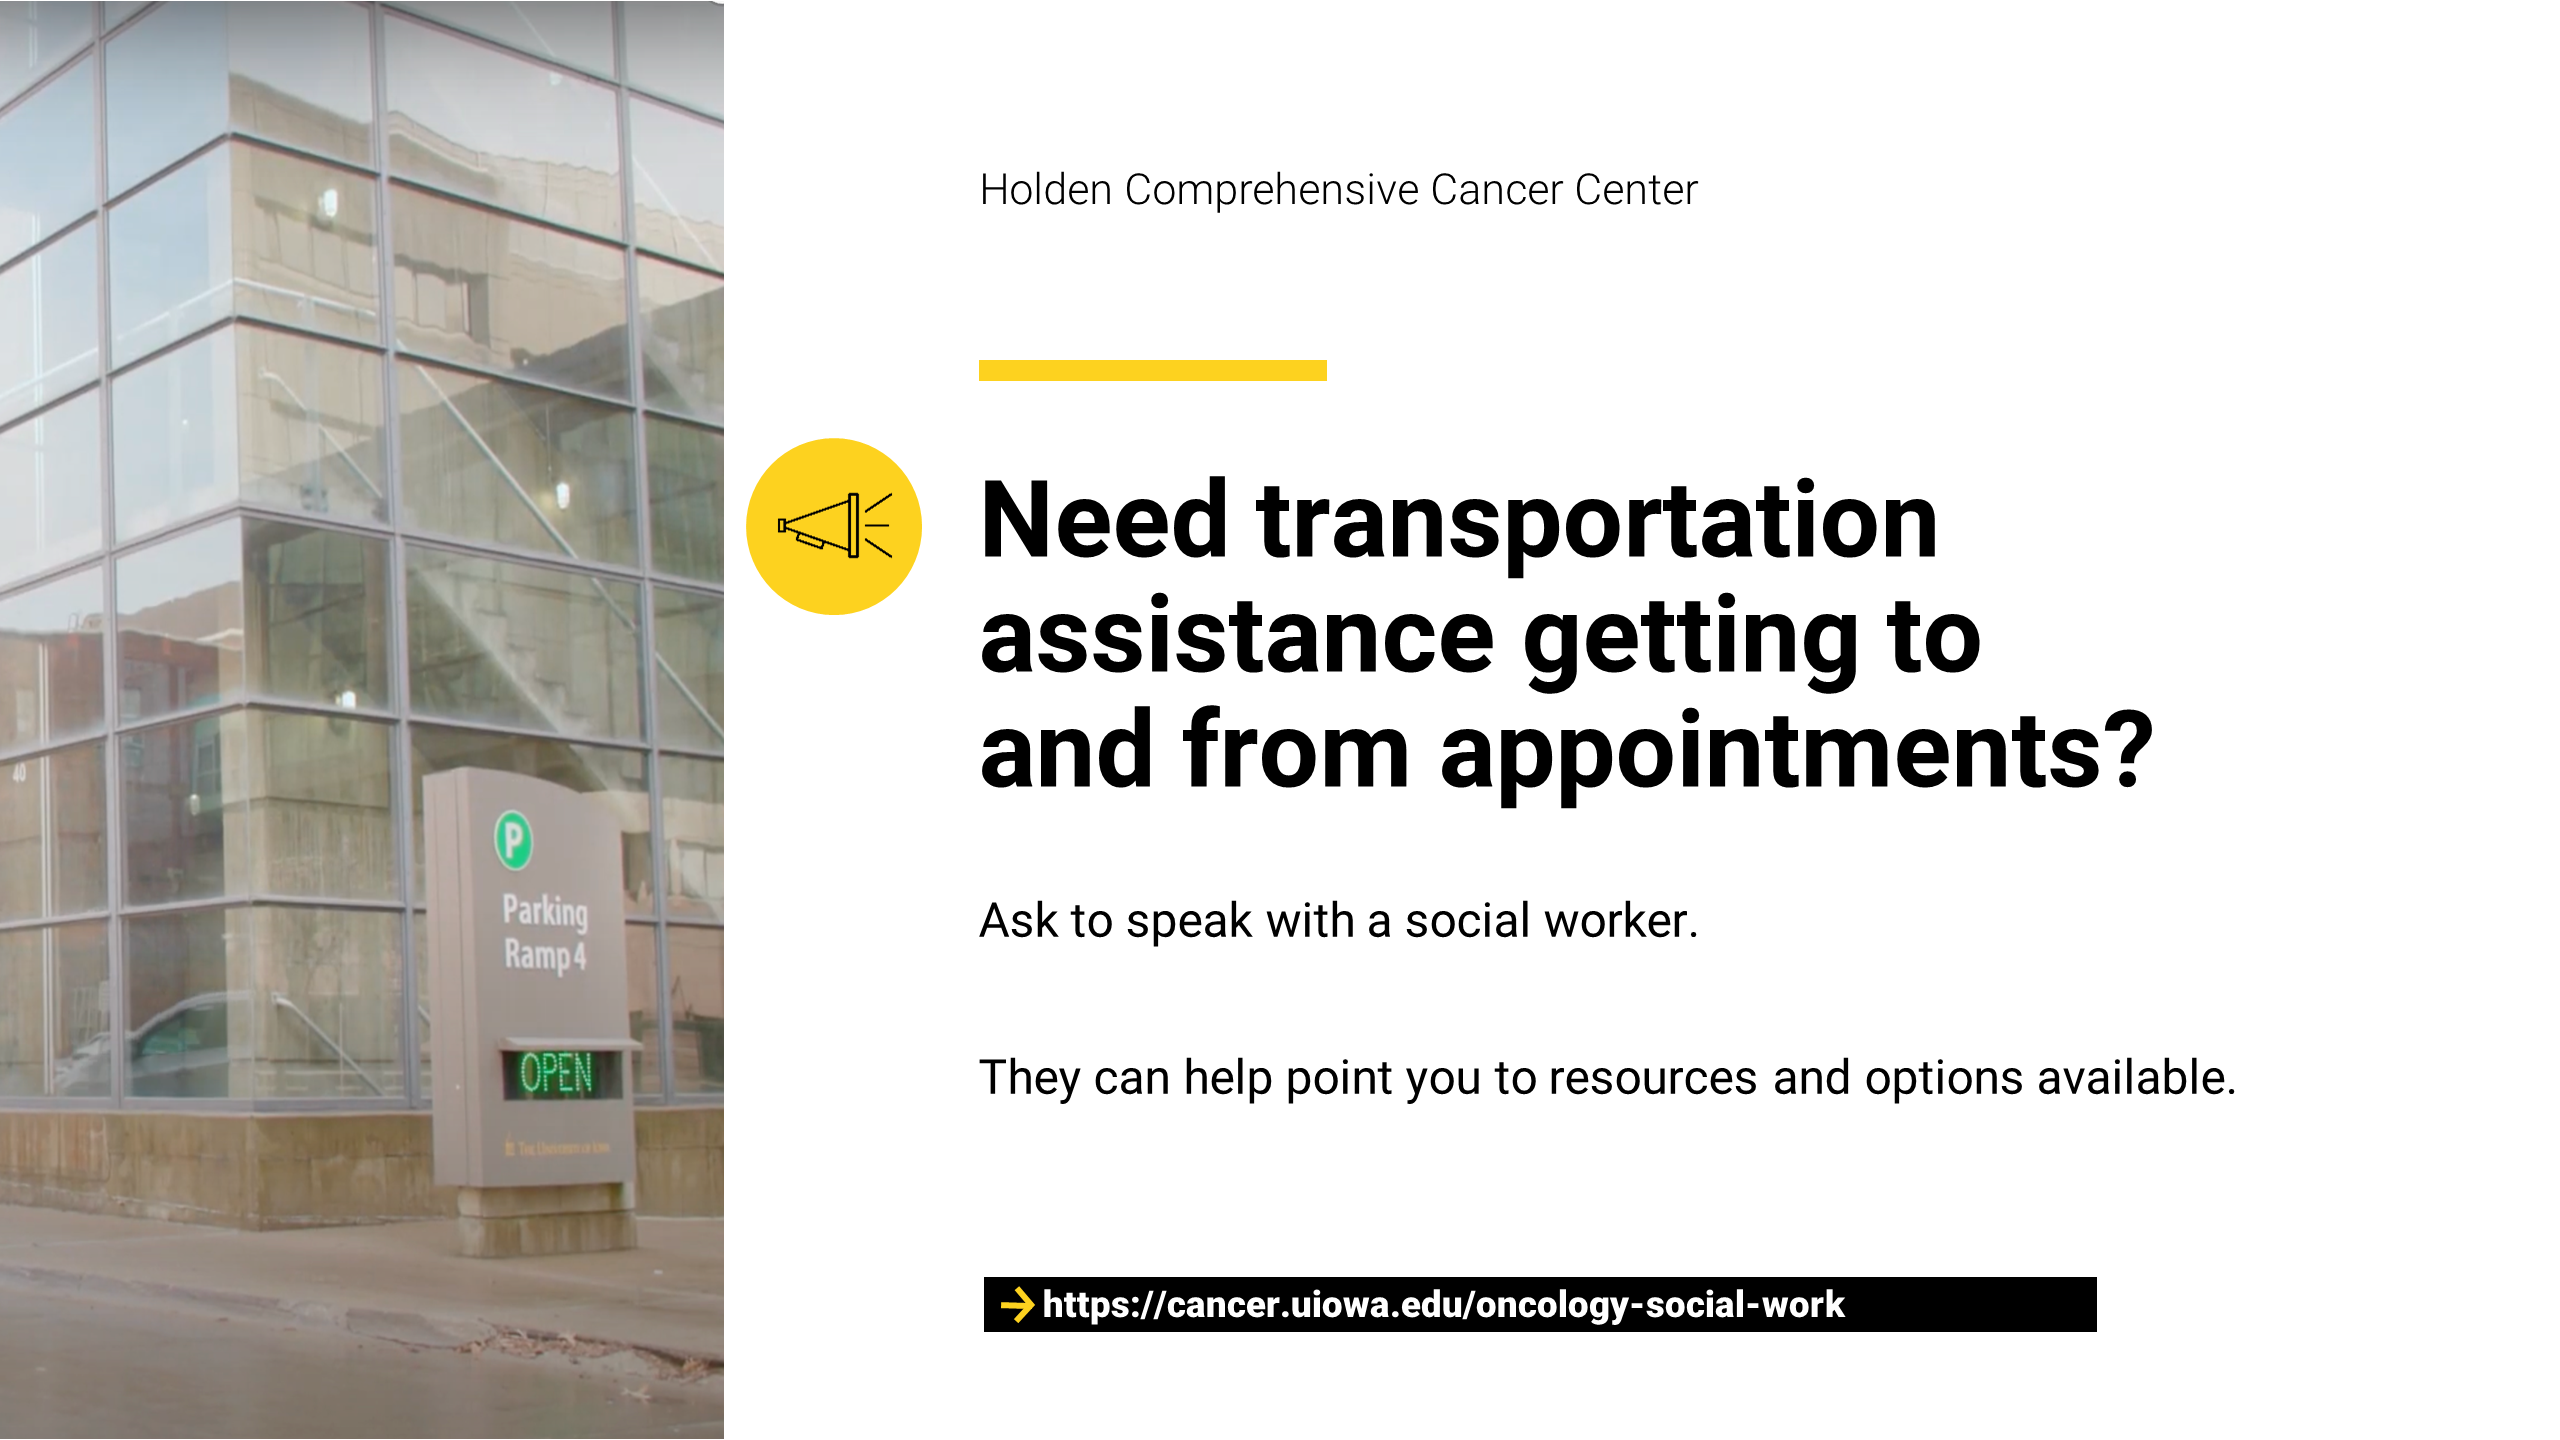 Need transportation assistance getting to and from appointments? Speak with your social worker.